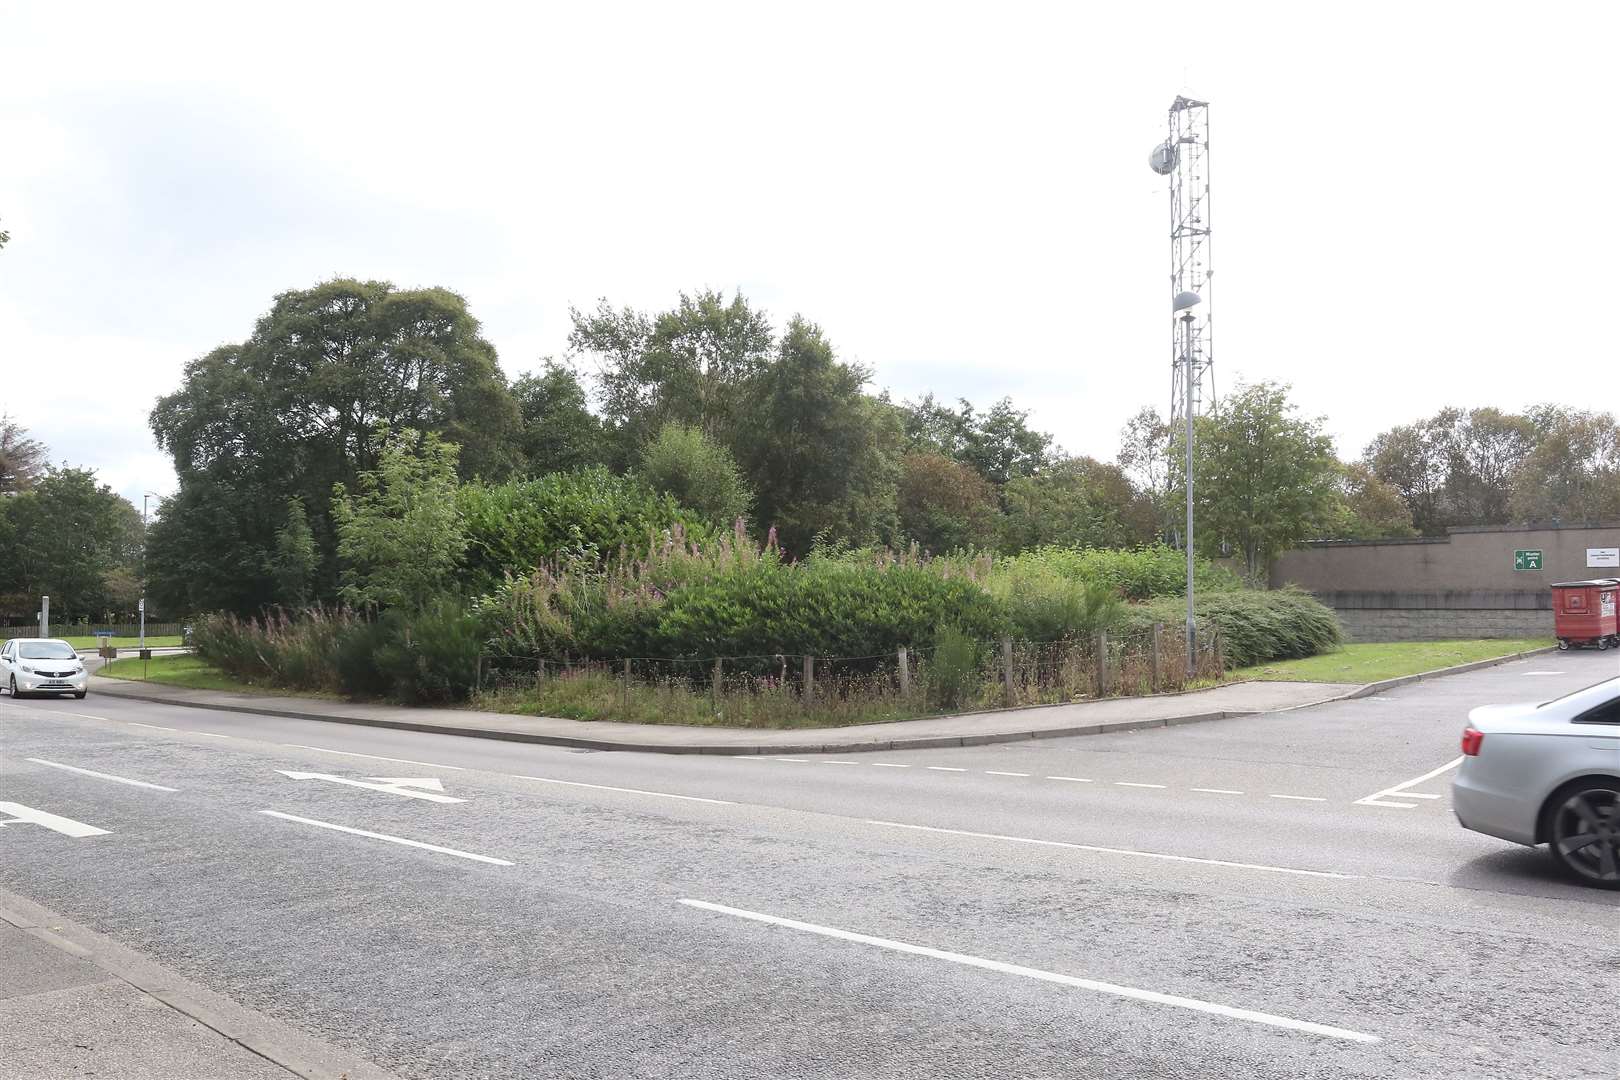 The woodland site next to Inverurie Police station where a development of flats is planned.